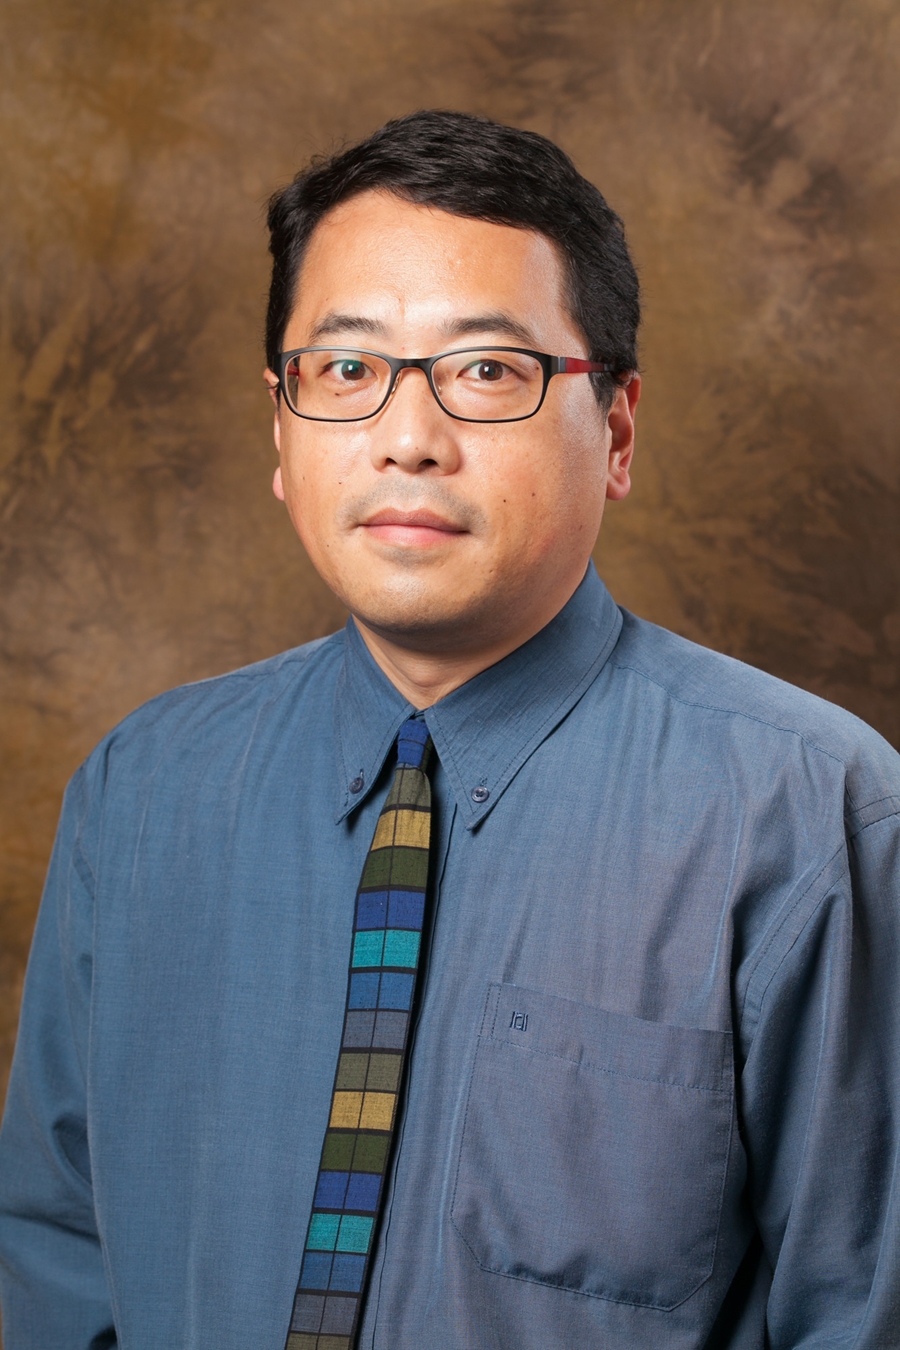 Tatsuya Fukushima, associate professor of Japanese and linguistics at the University of Arkansas is one of the featured speakers at the workforce development talk.